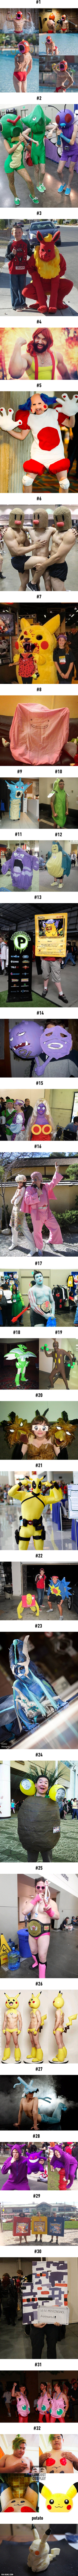 32 Weird Pokémon Cosplays You Can't Unsee